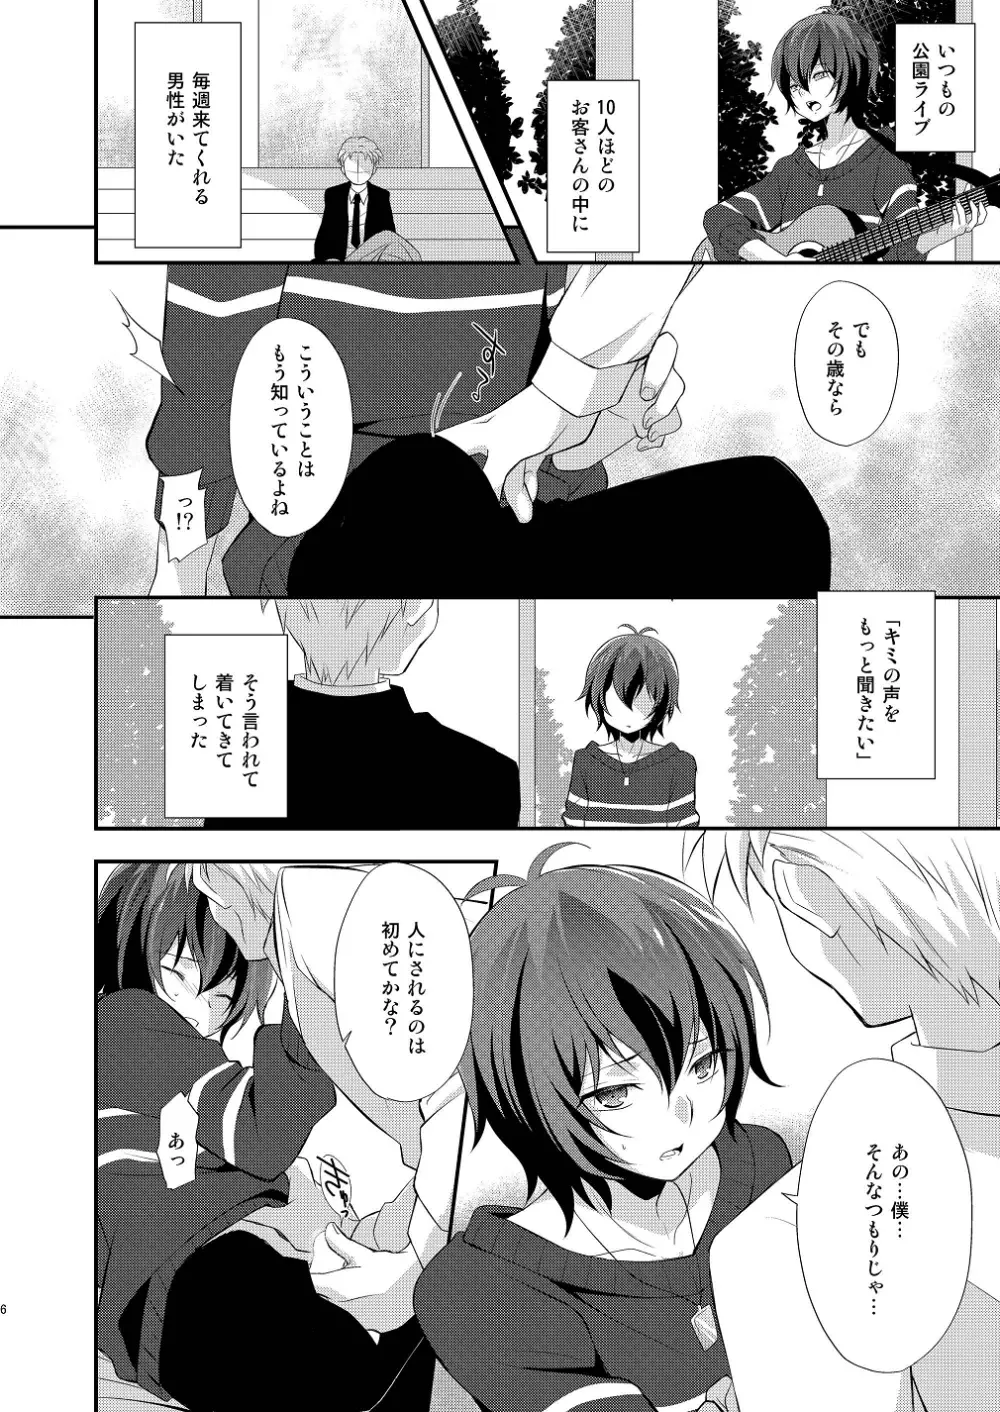 Tricolor Party - page6